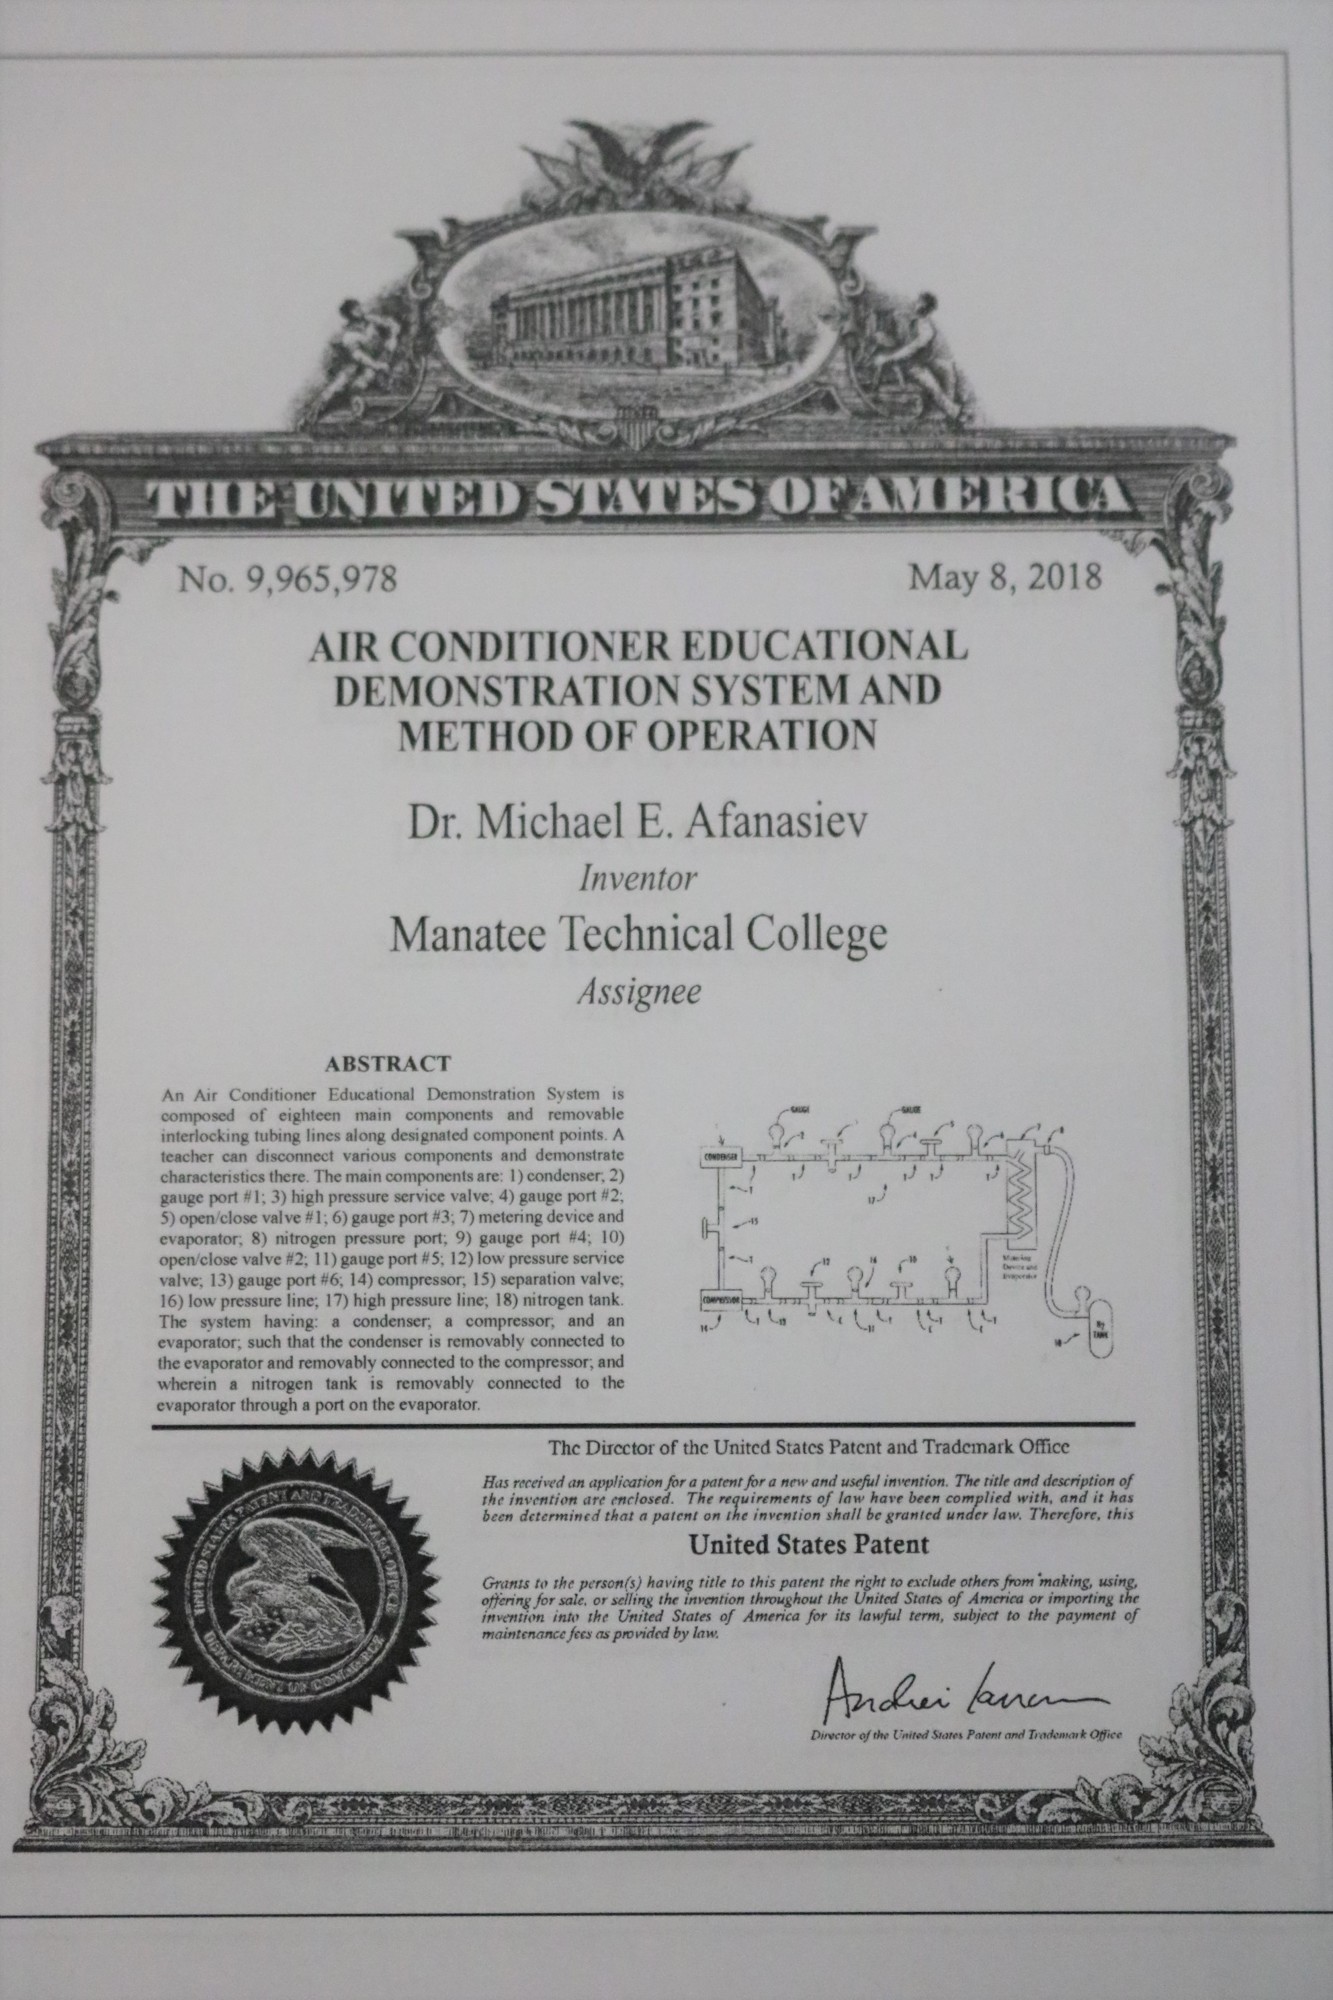 A photograph of the patent for Michael Afanasiev's invention, assigned to Manatee Technical College.